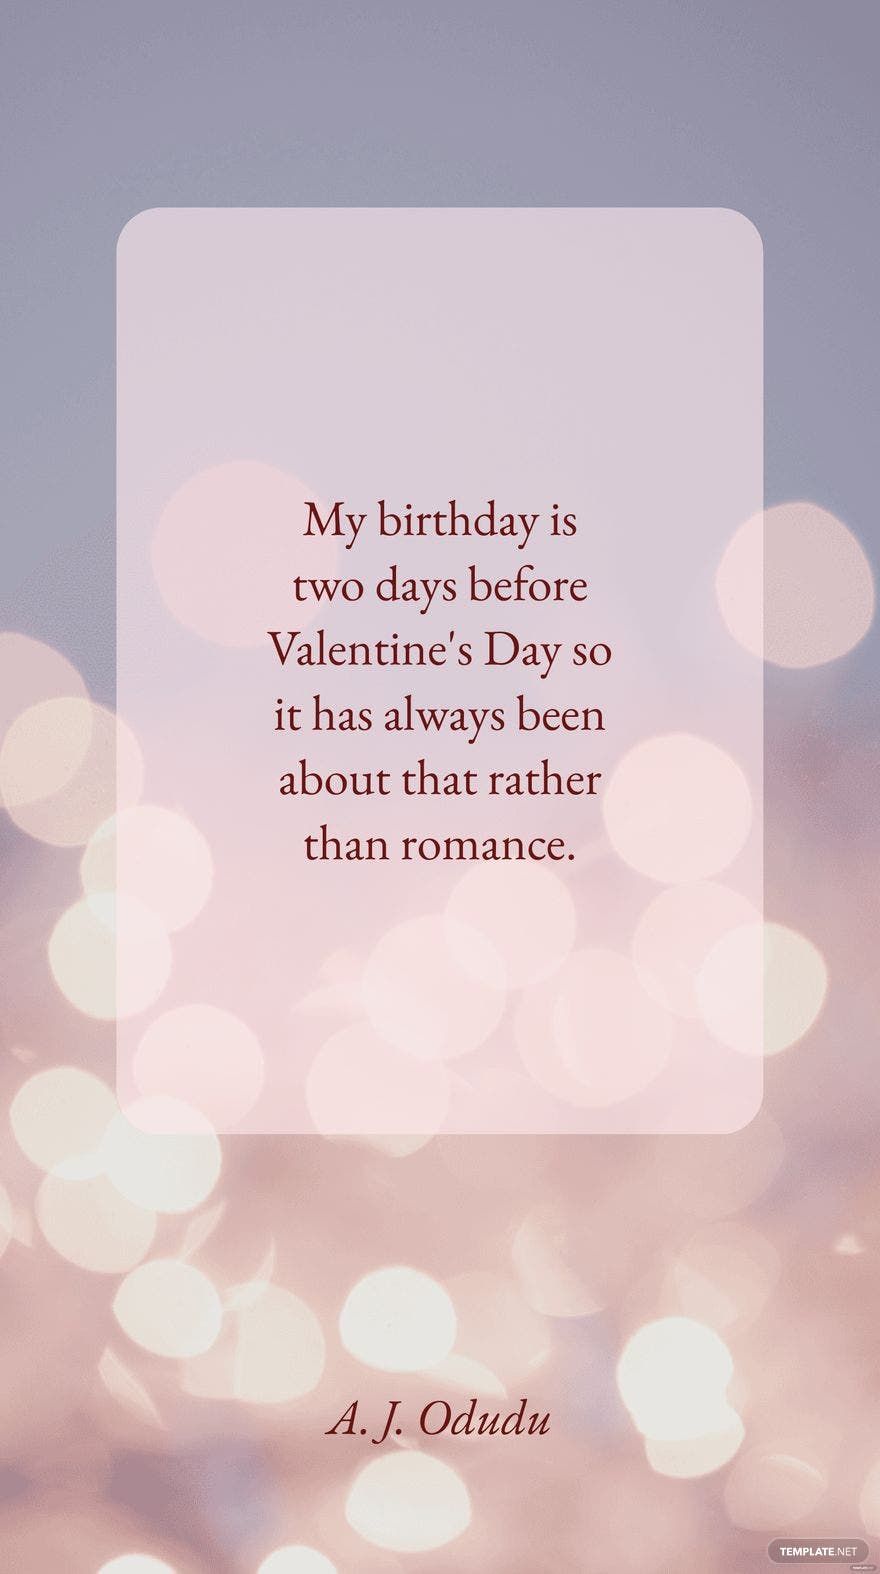 A. J. Odudu - My birthday is two days before Valentine's Day so it has always been about that rather than romance. in JPEG